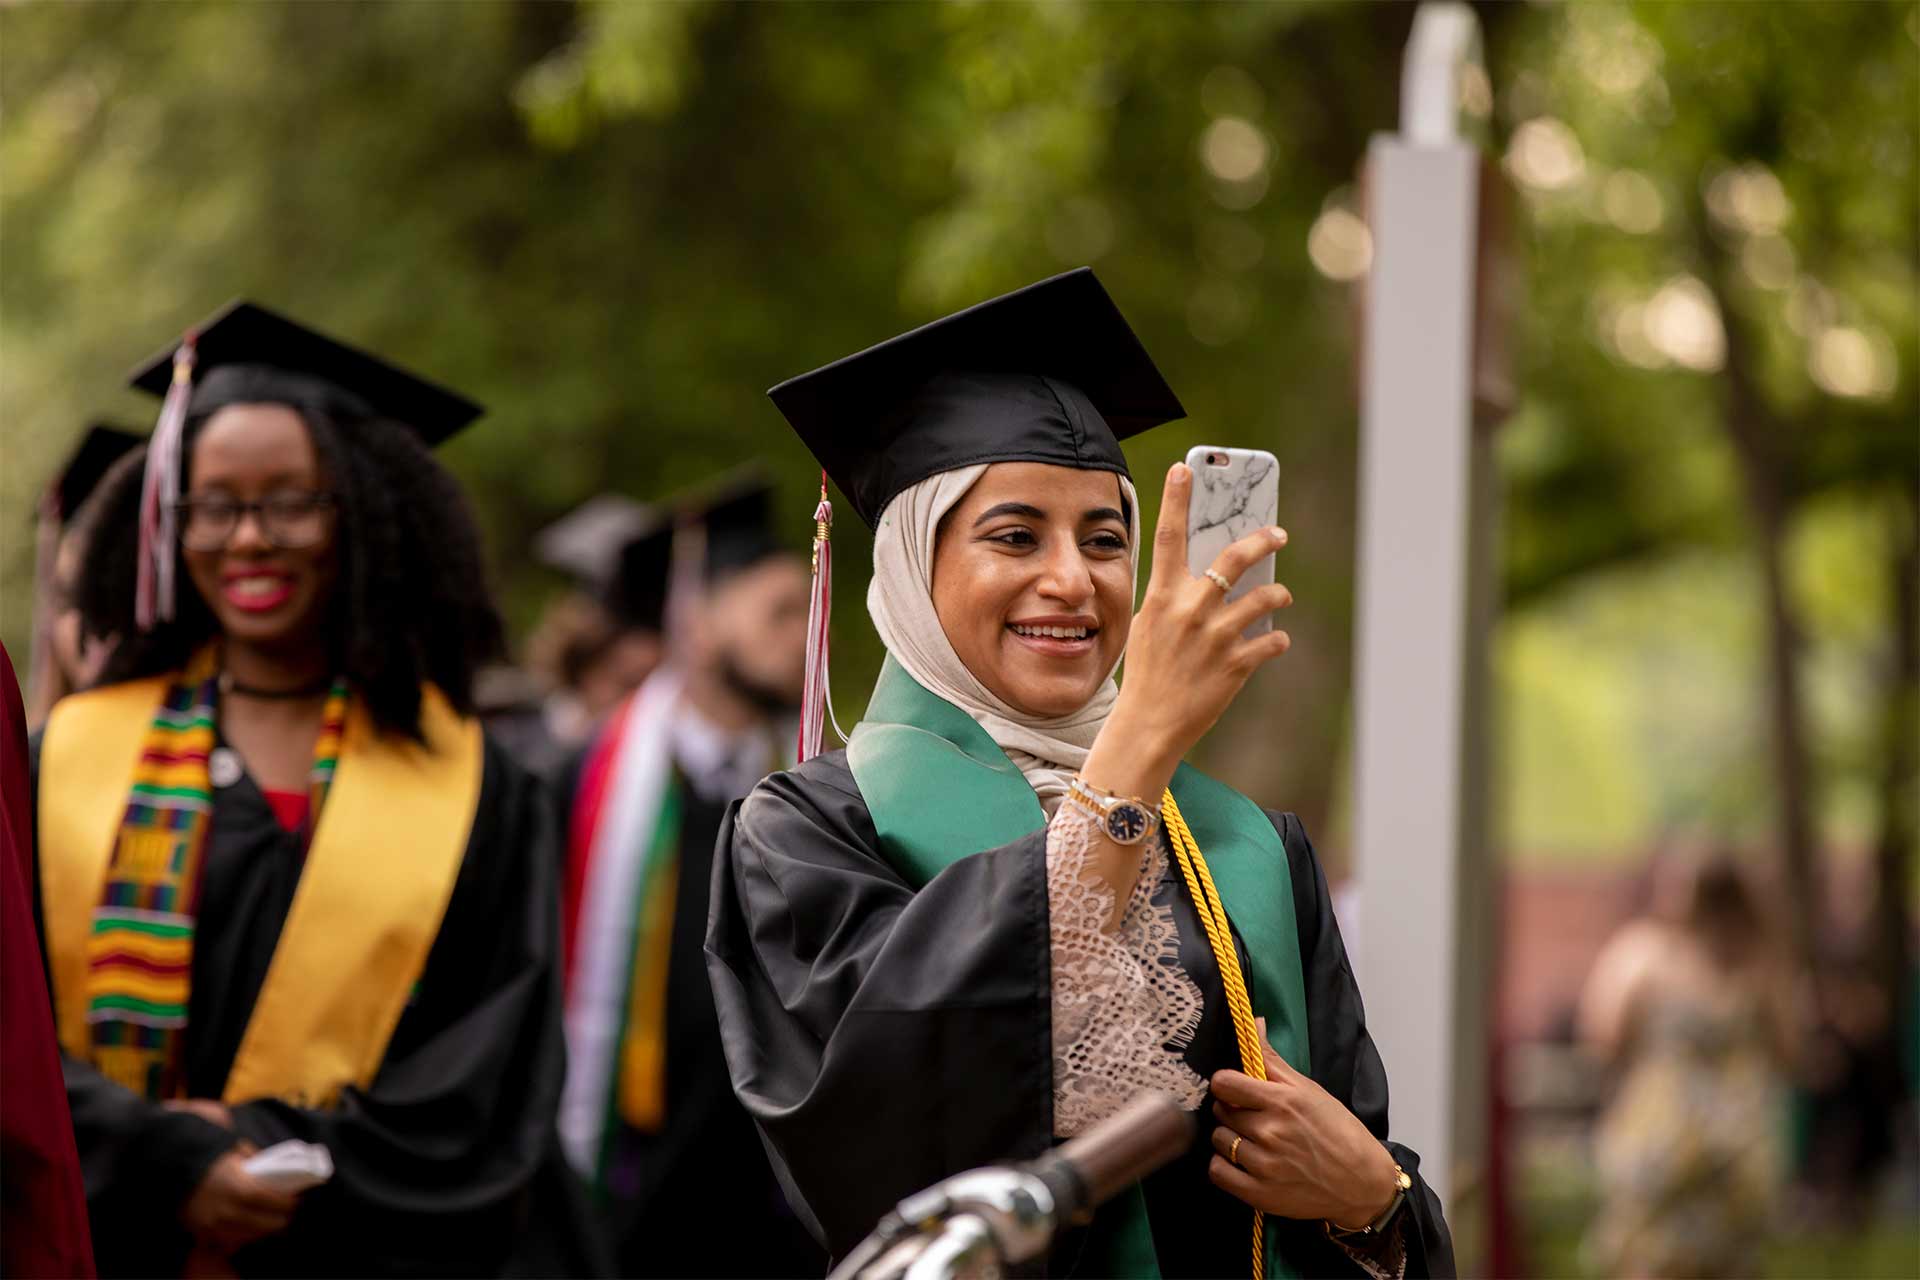 Student takes a selfie at Commencement.